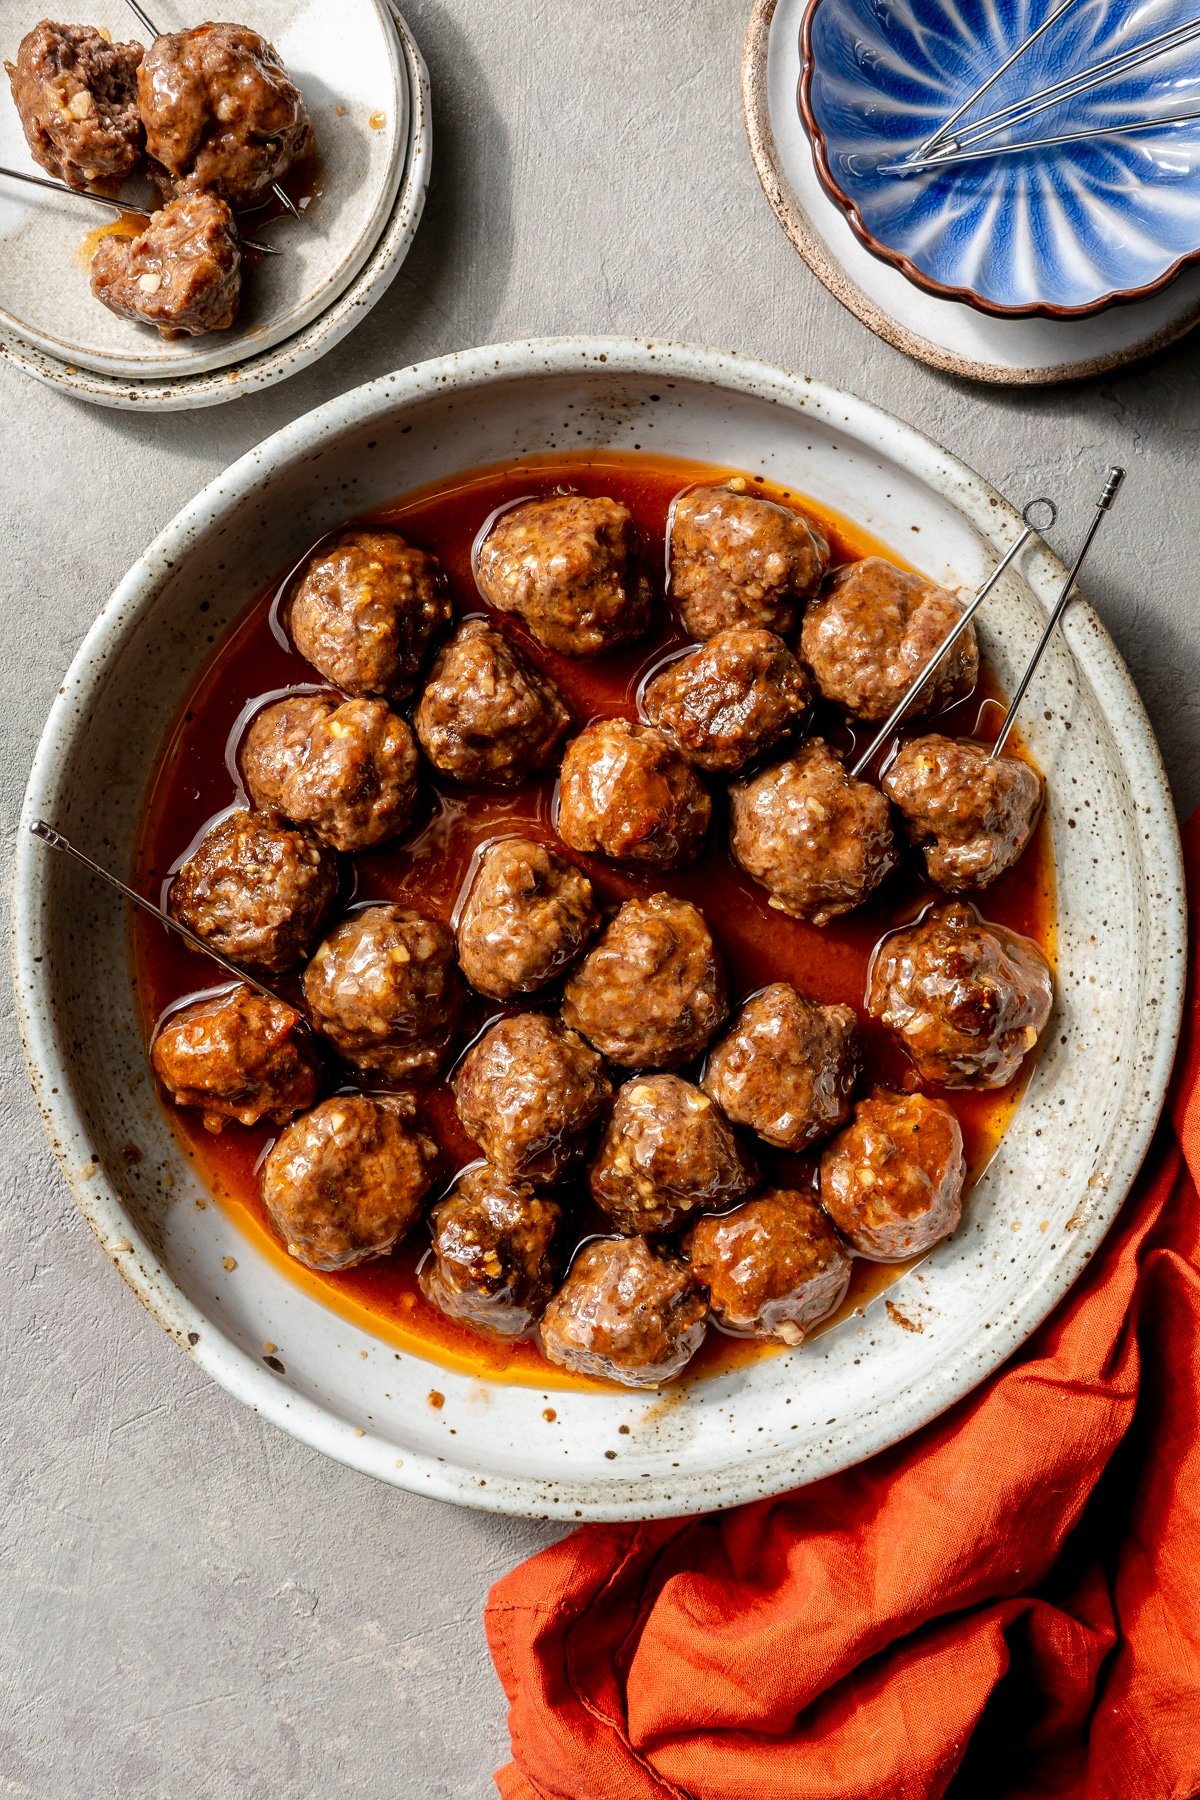 Sweet and sour meatballs have been placed in a serving bowl. Serving skewers have been placed in a couple. A blue serving bowl and red kitchen cloth sit to the side.